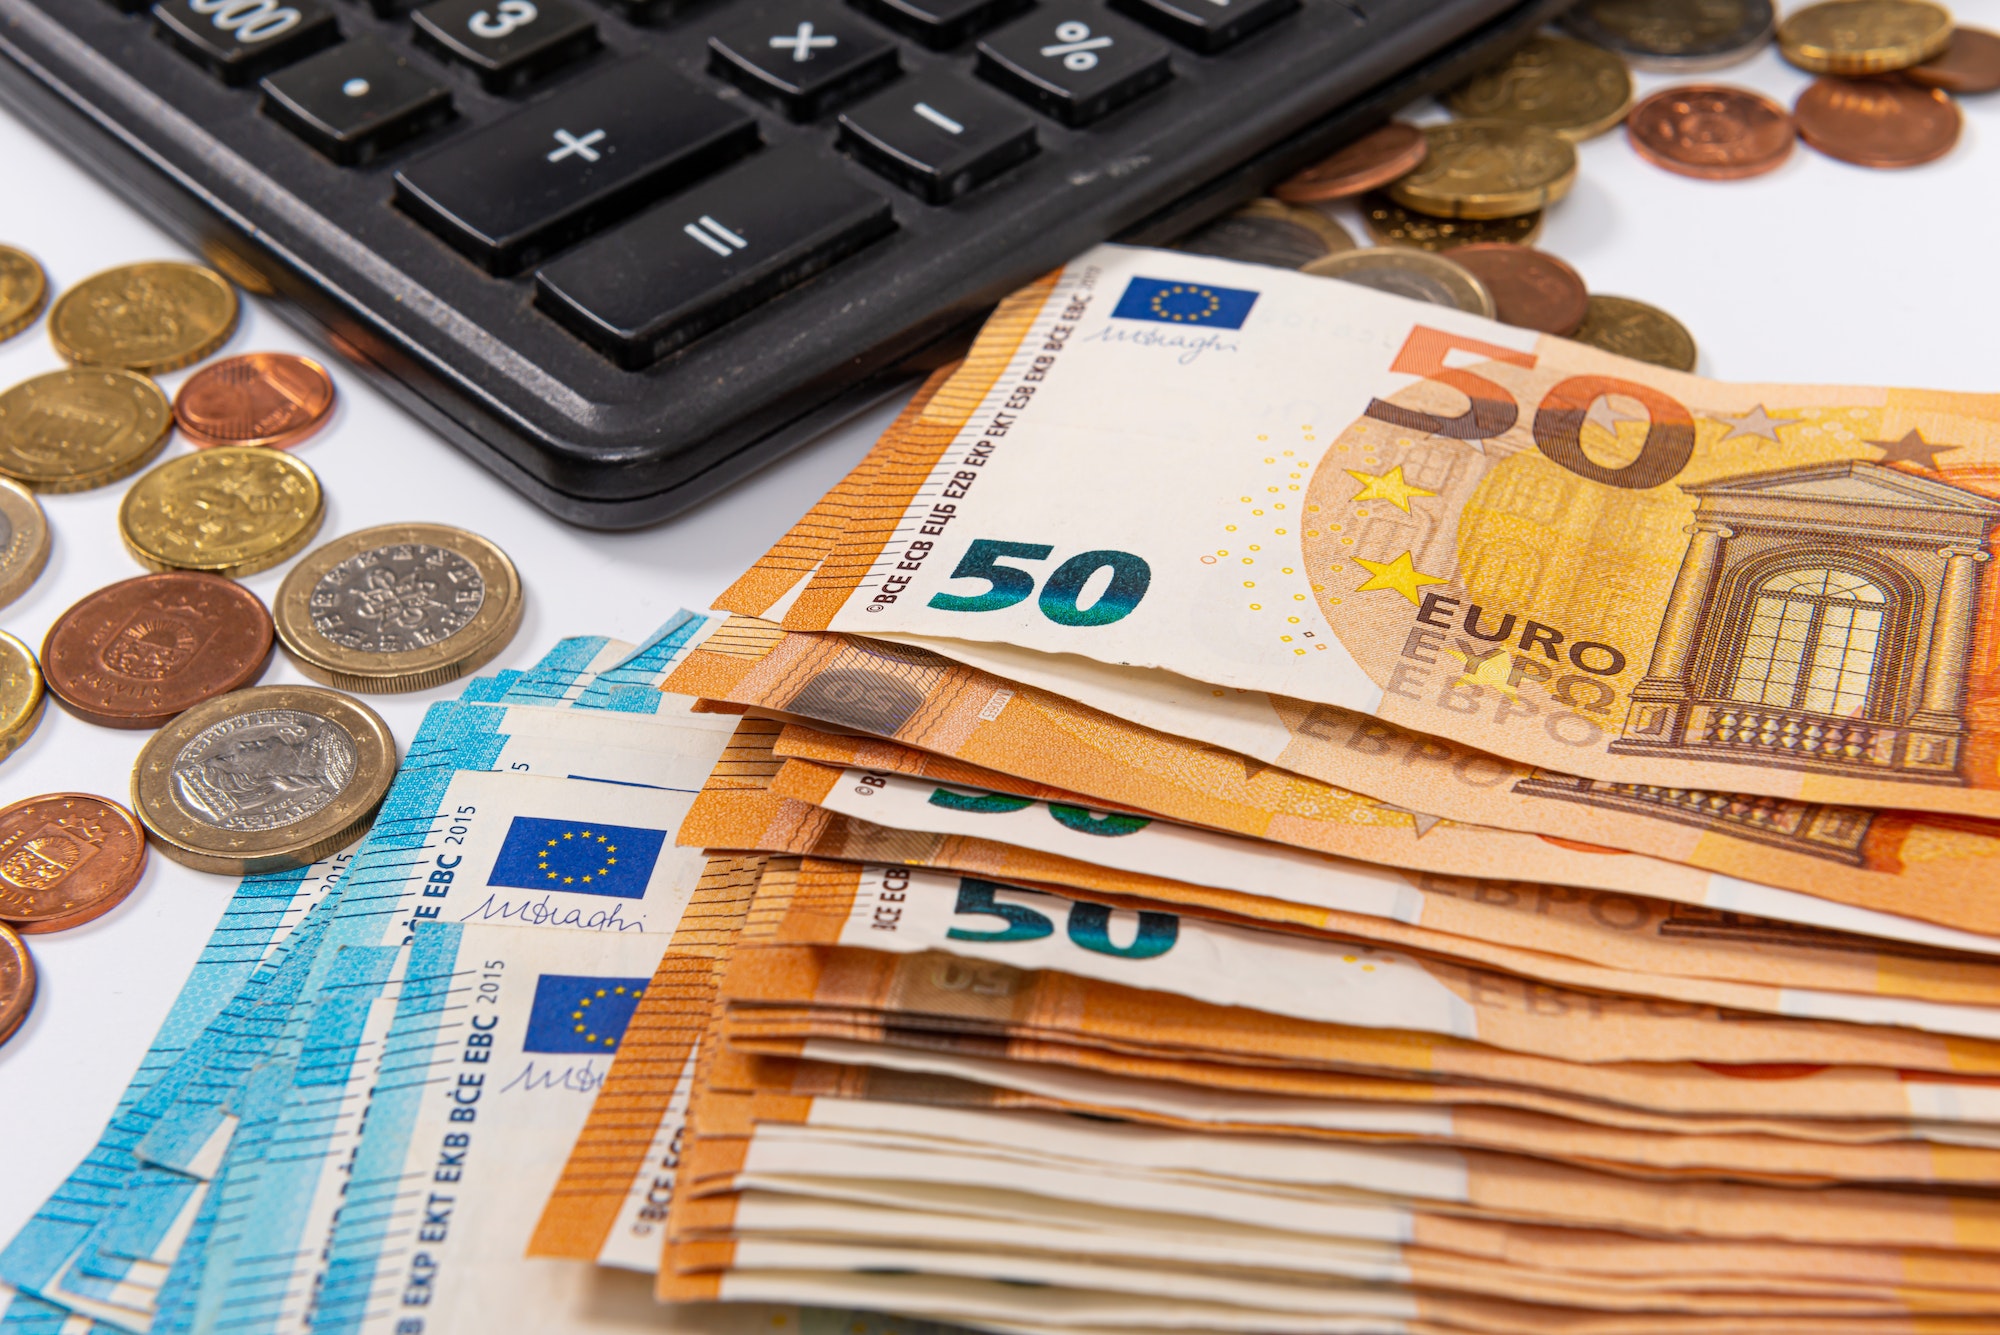 closeup of euro currency coins, banknotes and calculator, finance planning concept